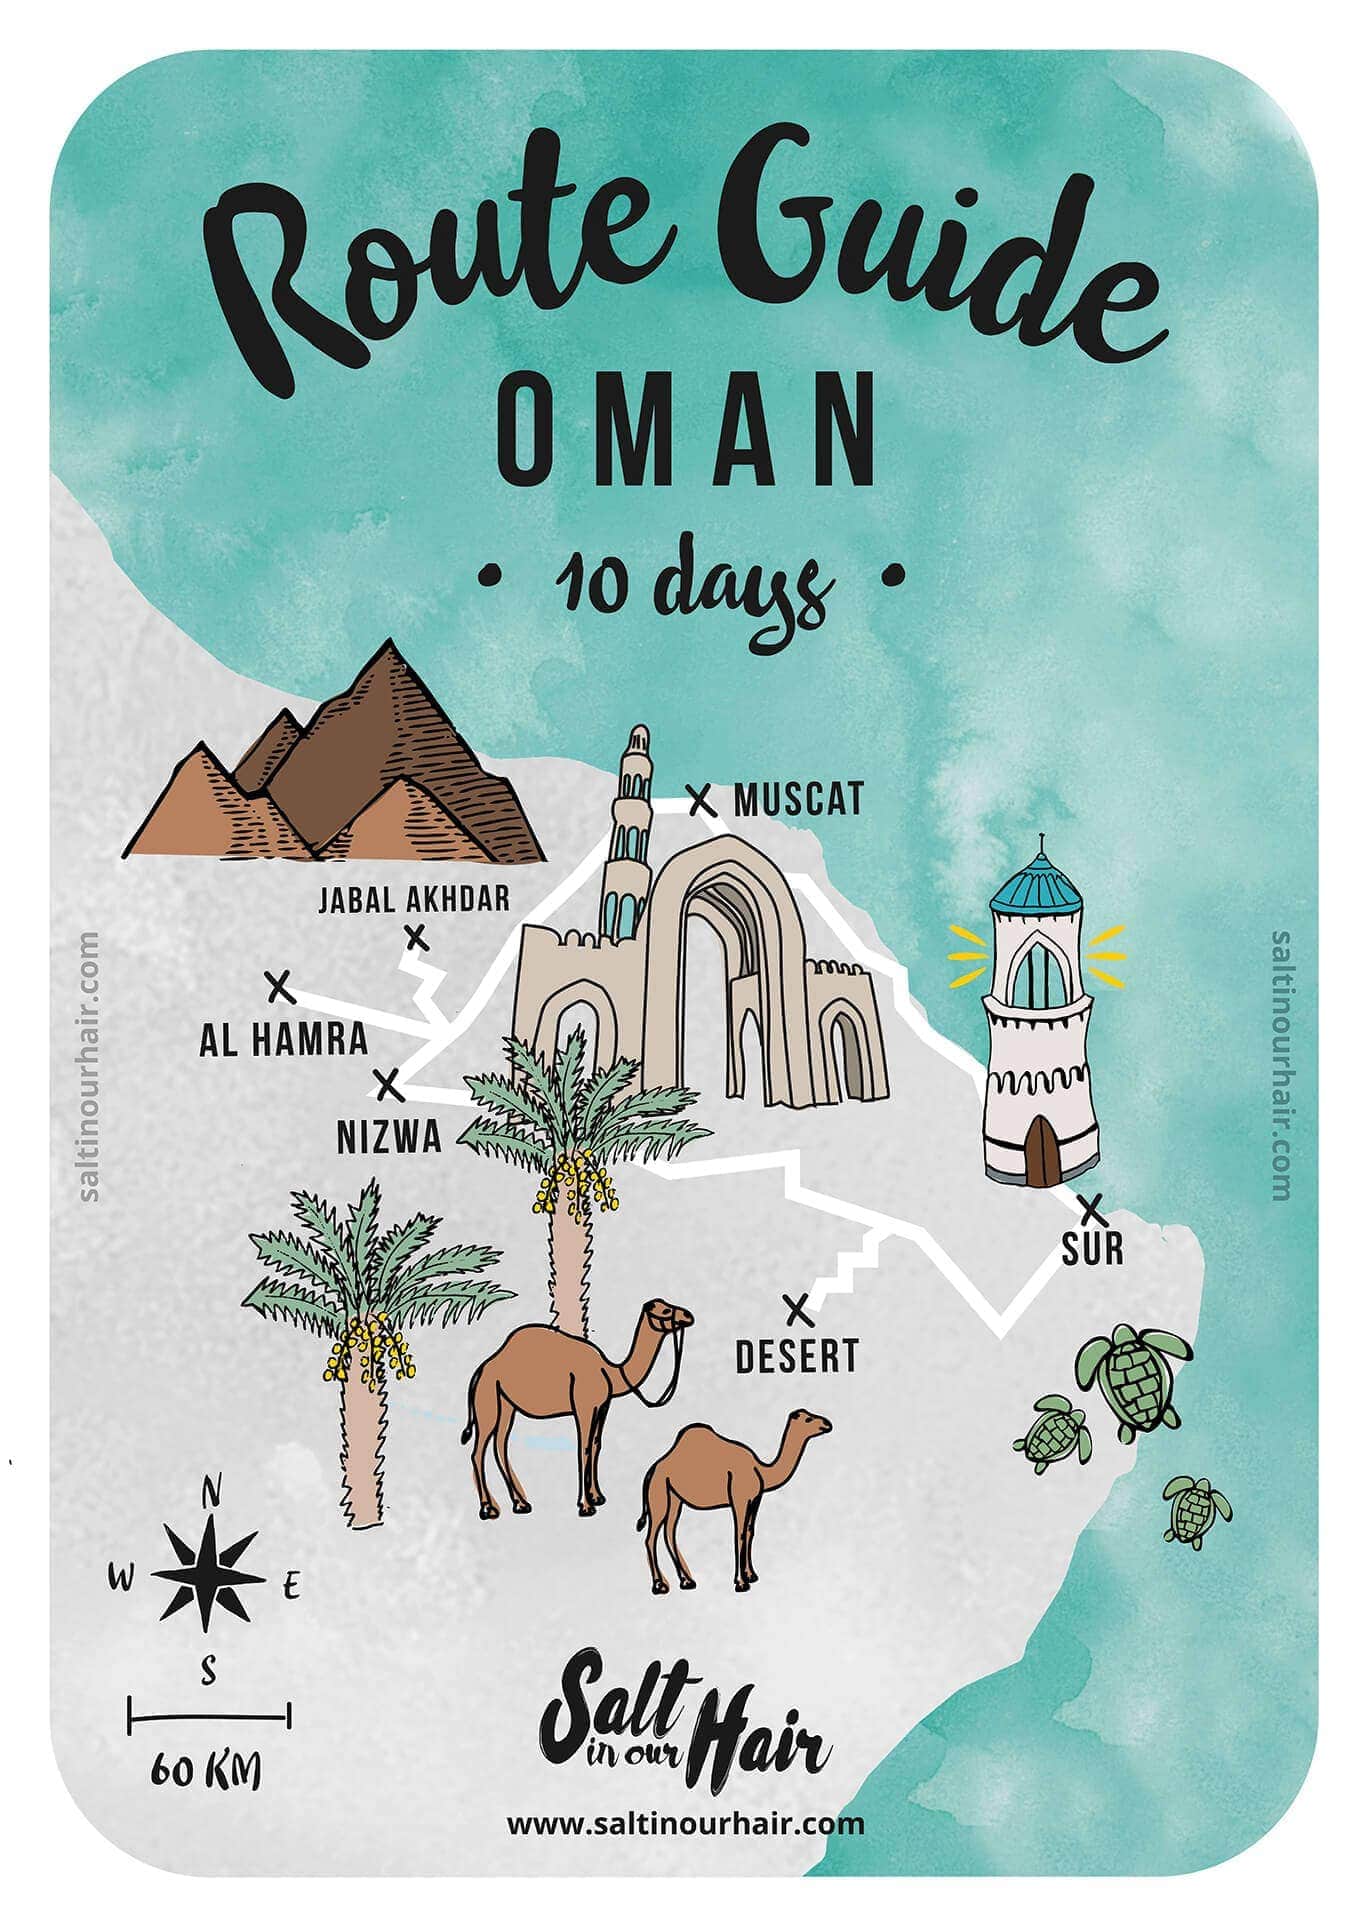 Oman route guide map 10 days